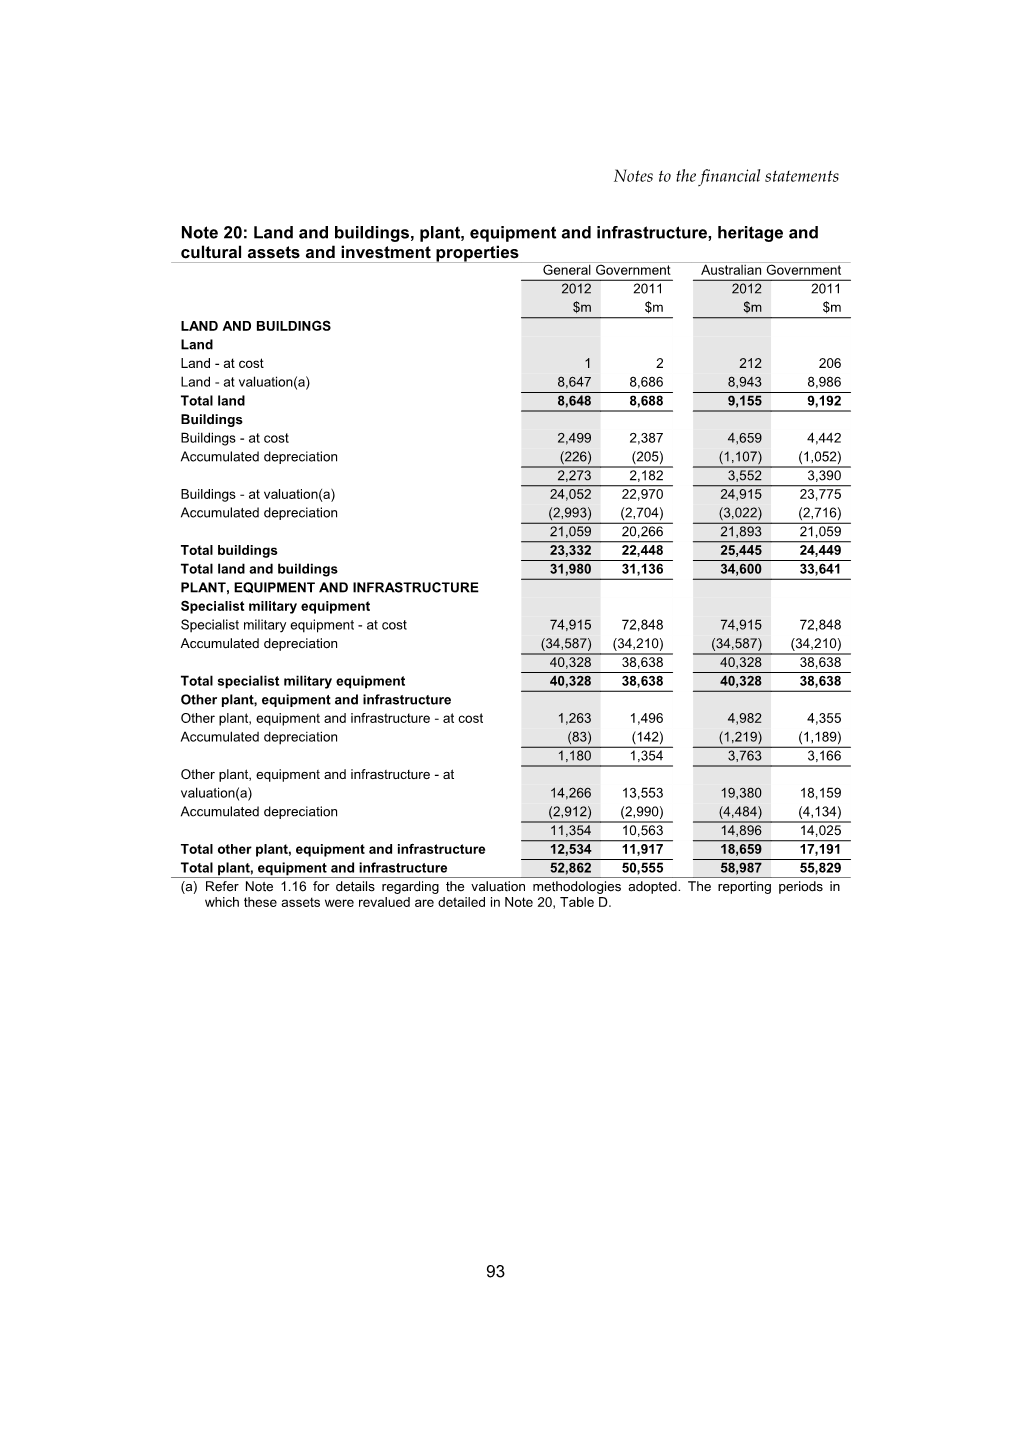 2012 Consolidated Financial Statements - Notes 20 - 27